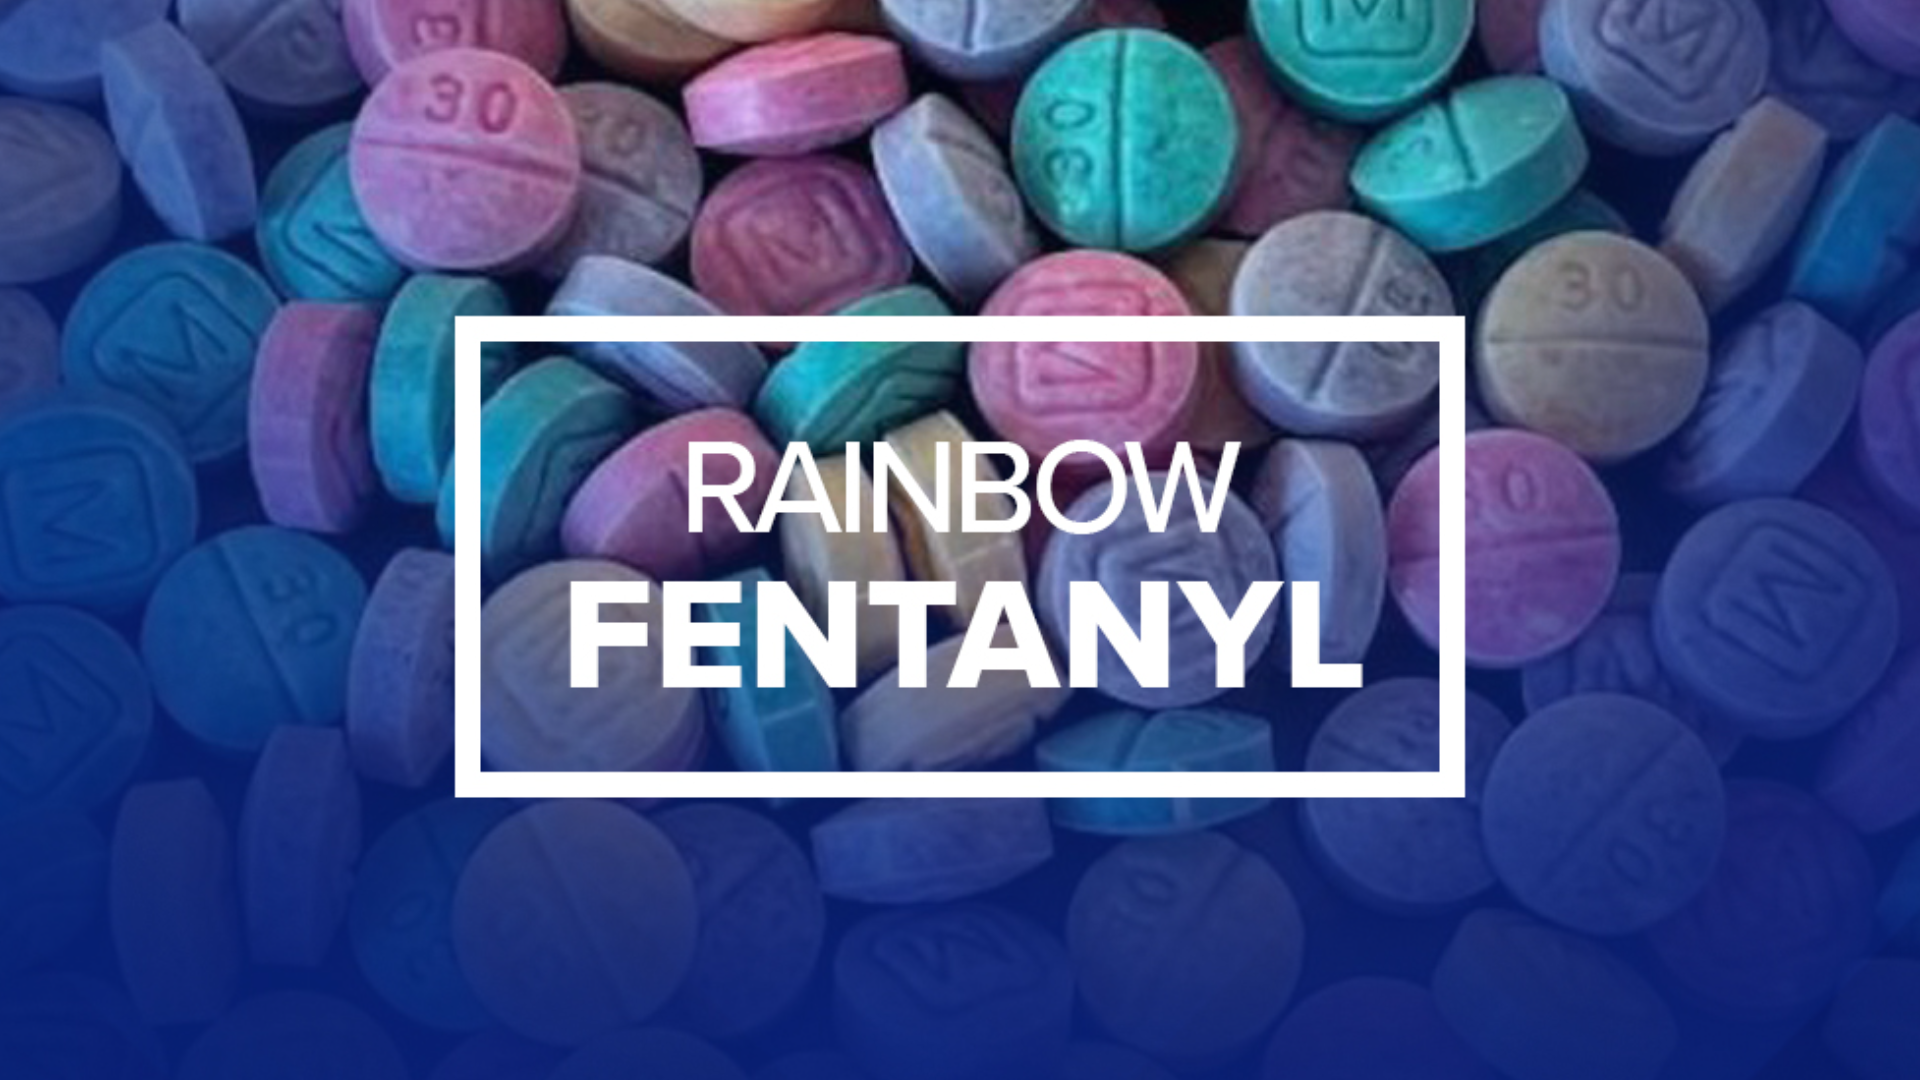 Federal law enforcement says rainbow fentanyl started showing up in the U.S. back in February. Officials are working to educate parents, students, and kids early.